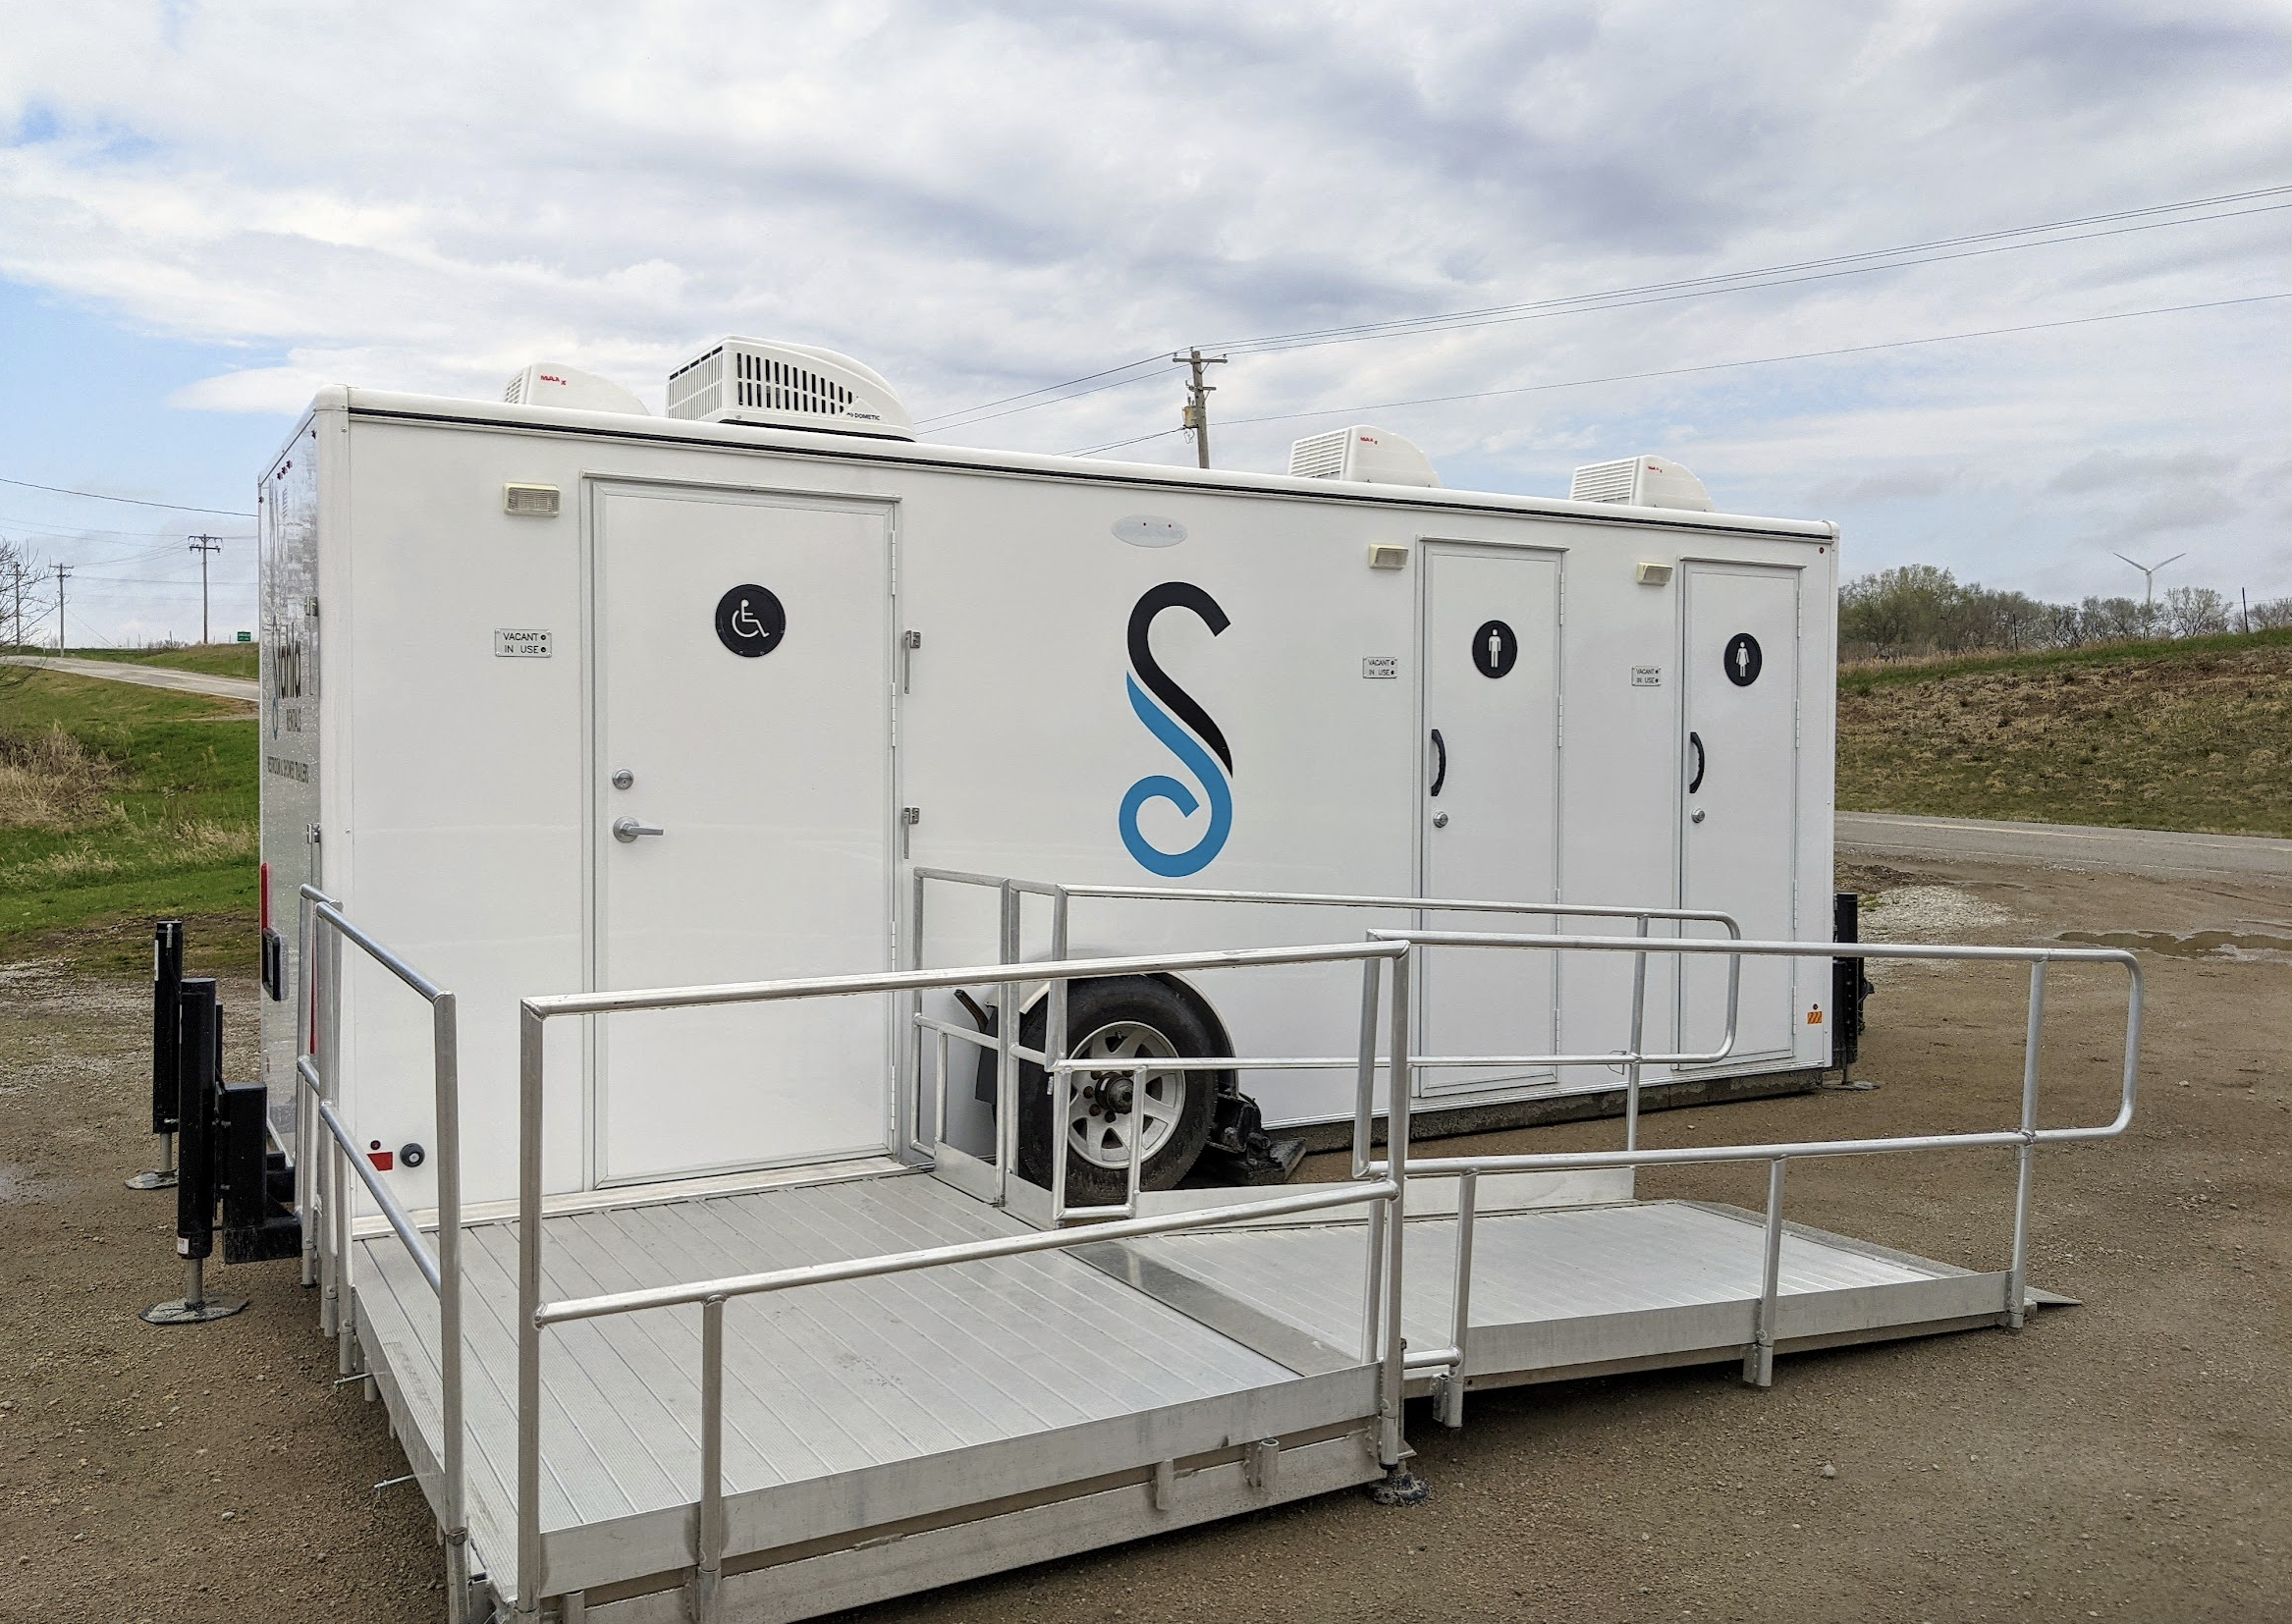 Shower and Restroom Trailer Rentals 1683149321 1683149276378 - Discover the Benefits of ADA Restroom Trailers for Your Event